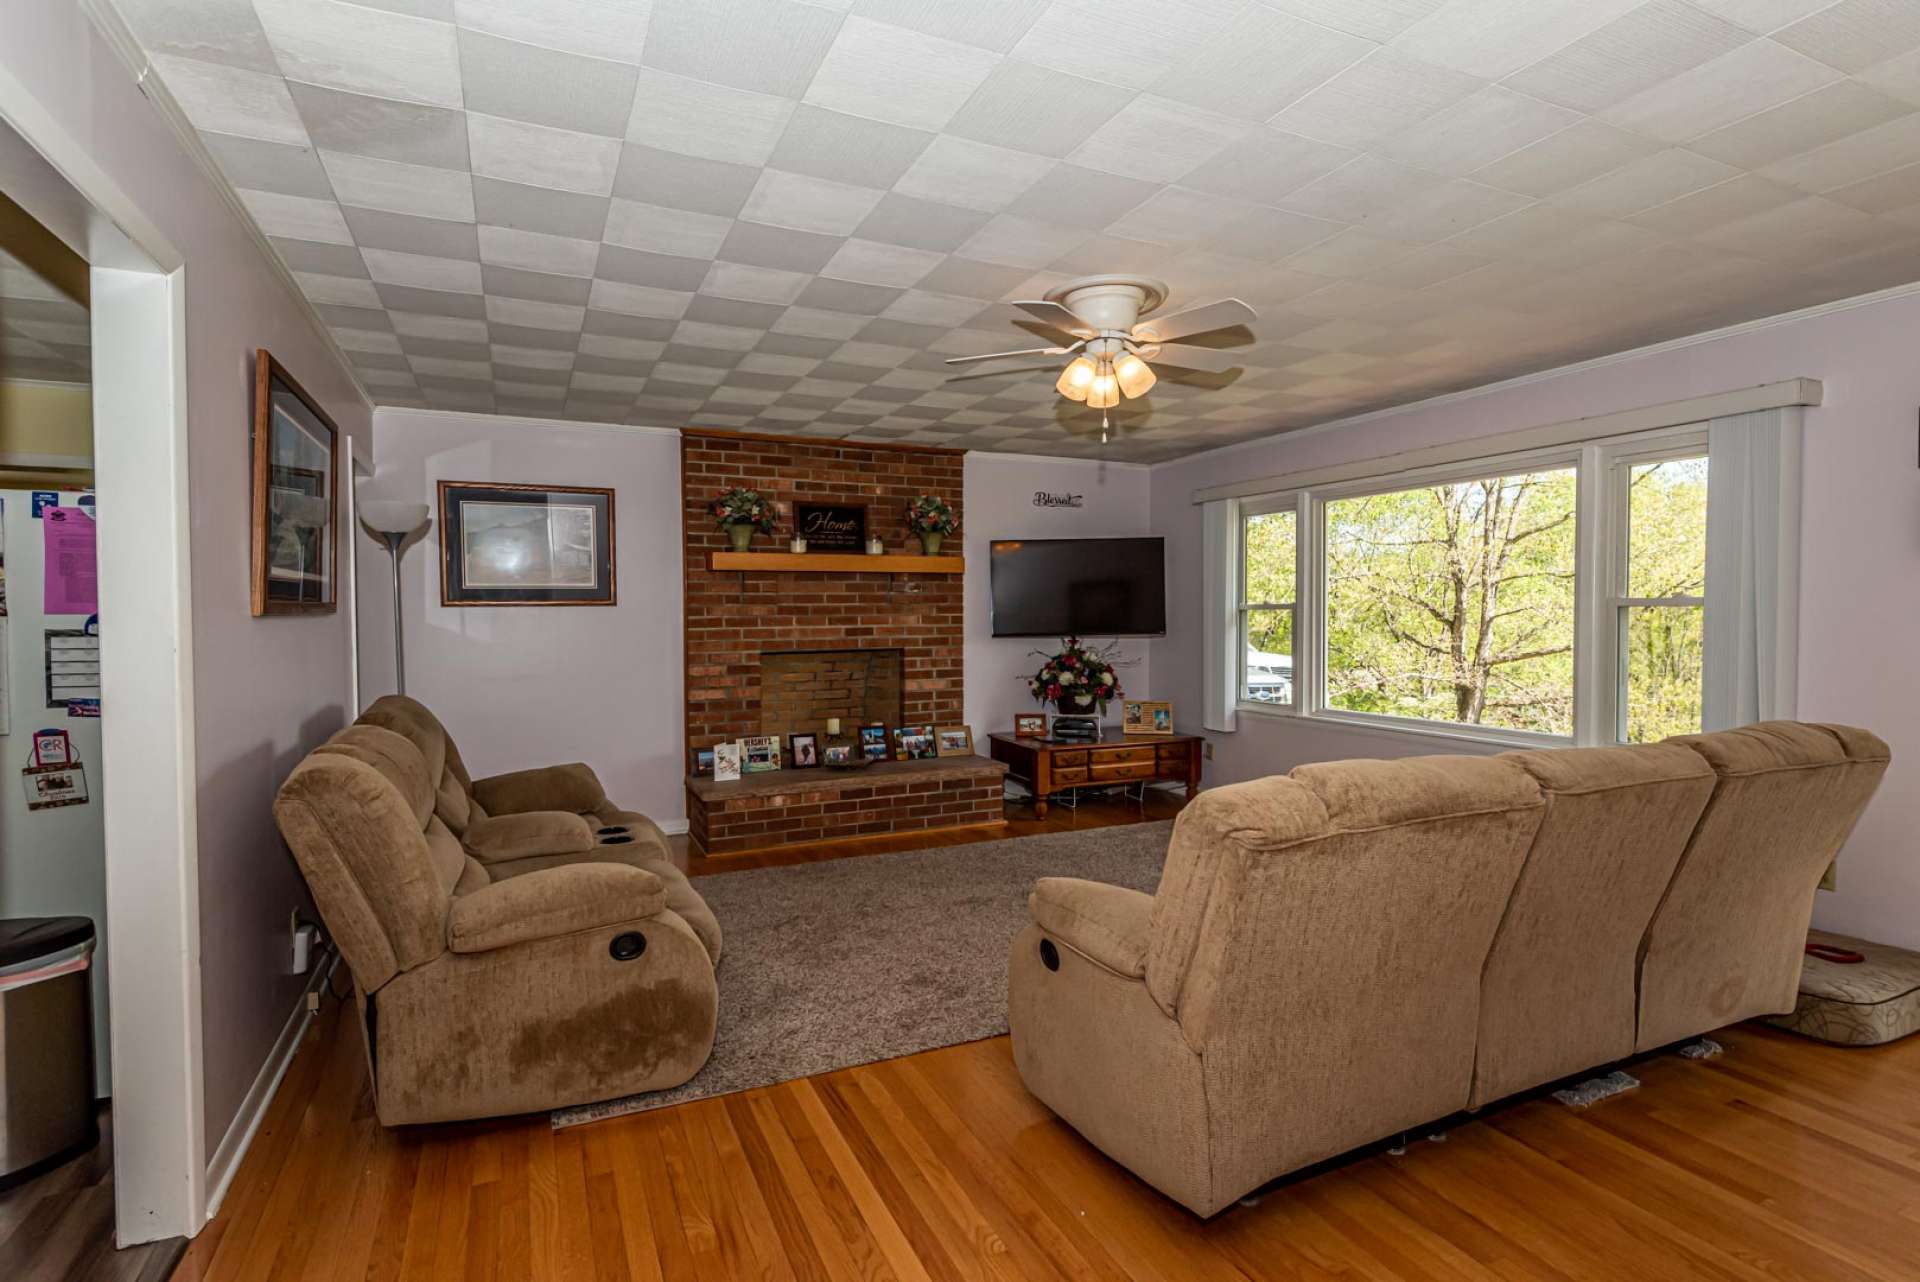 The living room features hardwood floor and large windows for natural light.